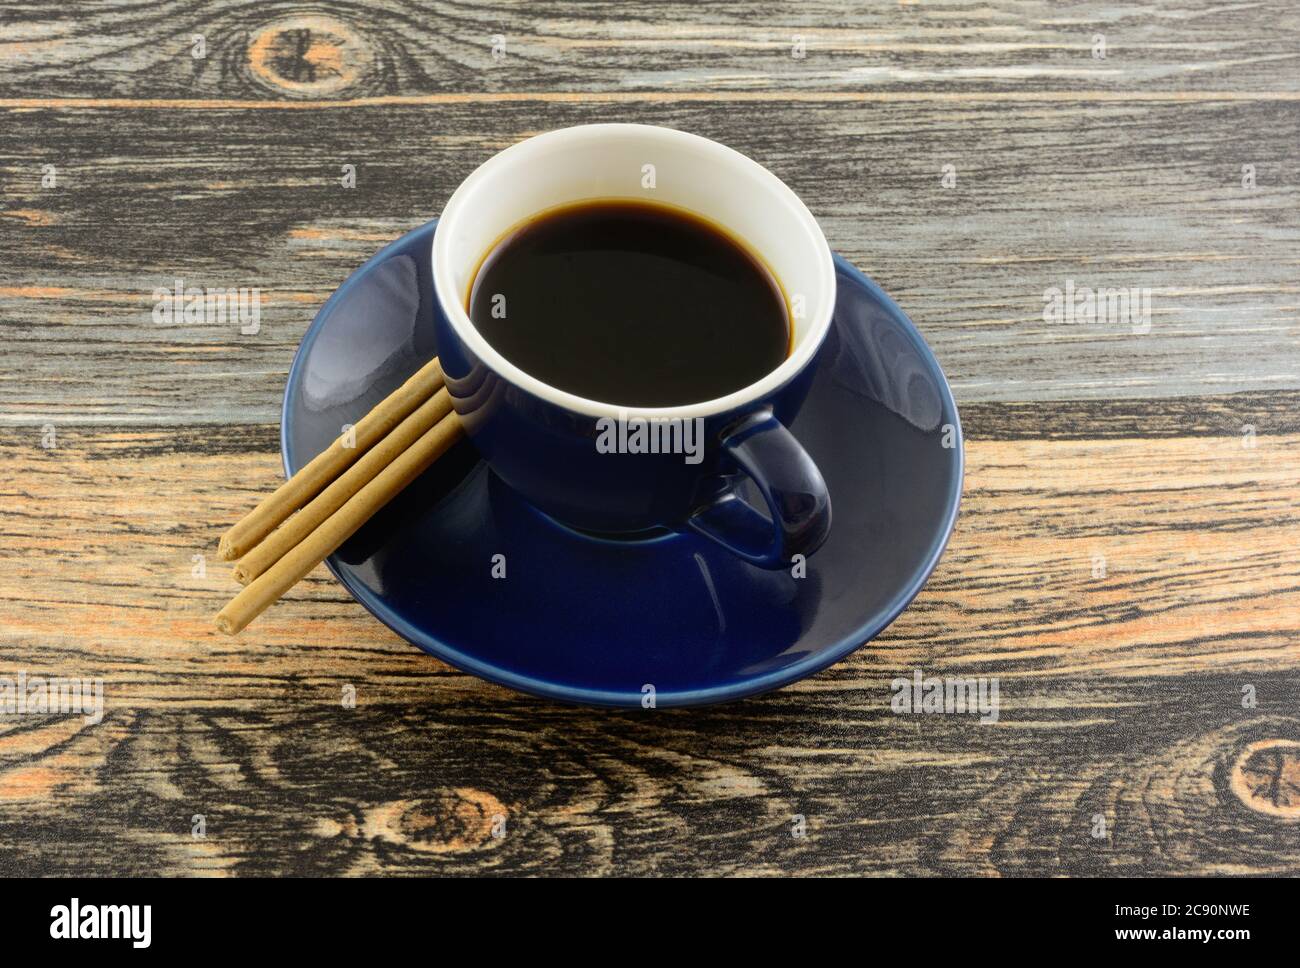 Demi-tasse cup of coffee with kona coffee flavored biscuit snacks on table Stock Photo